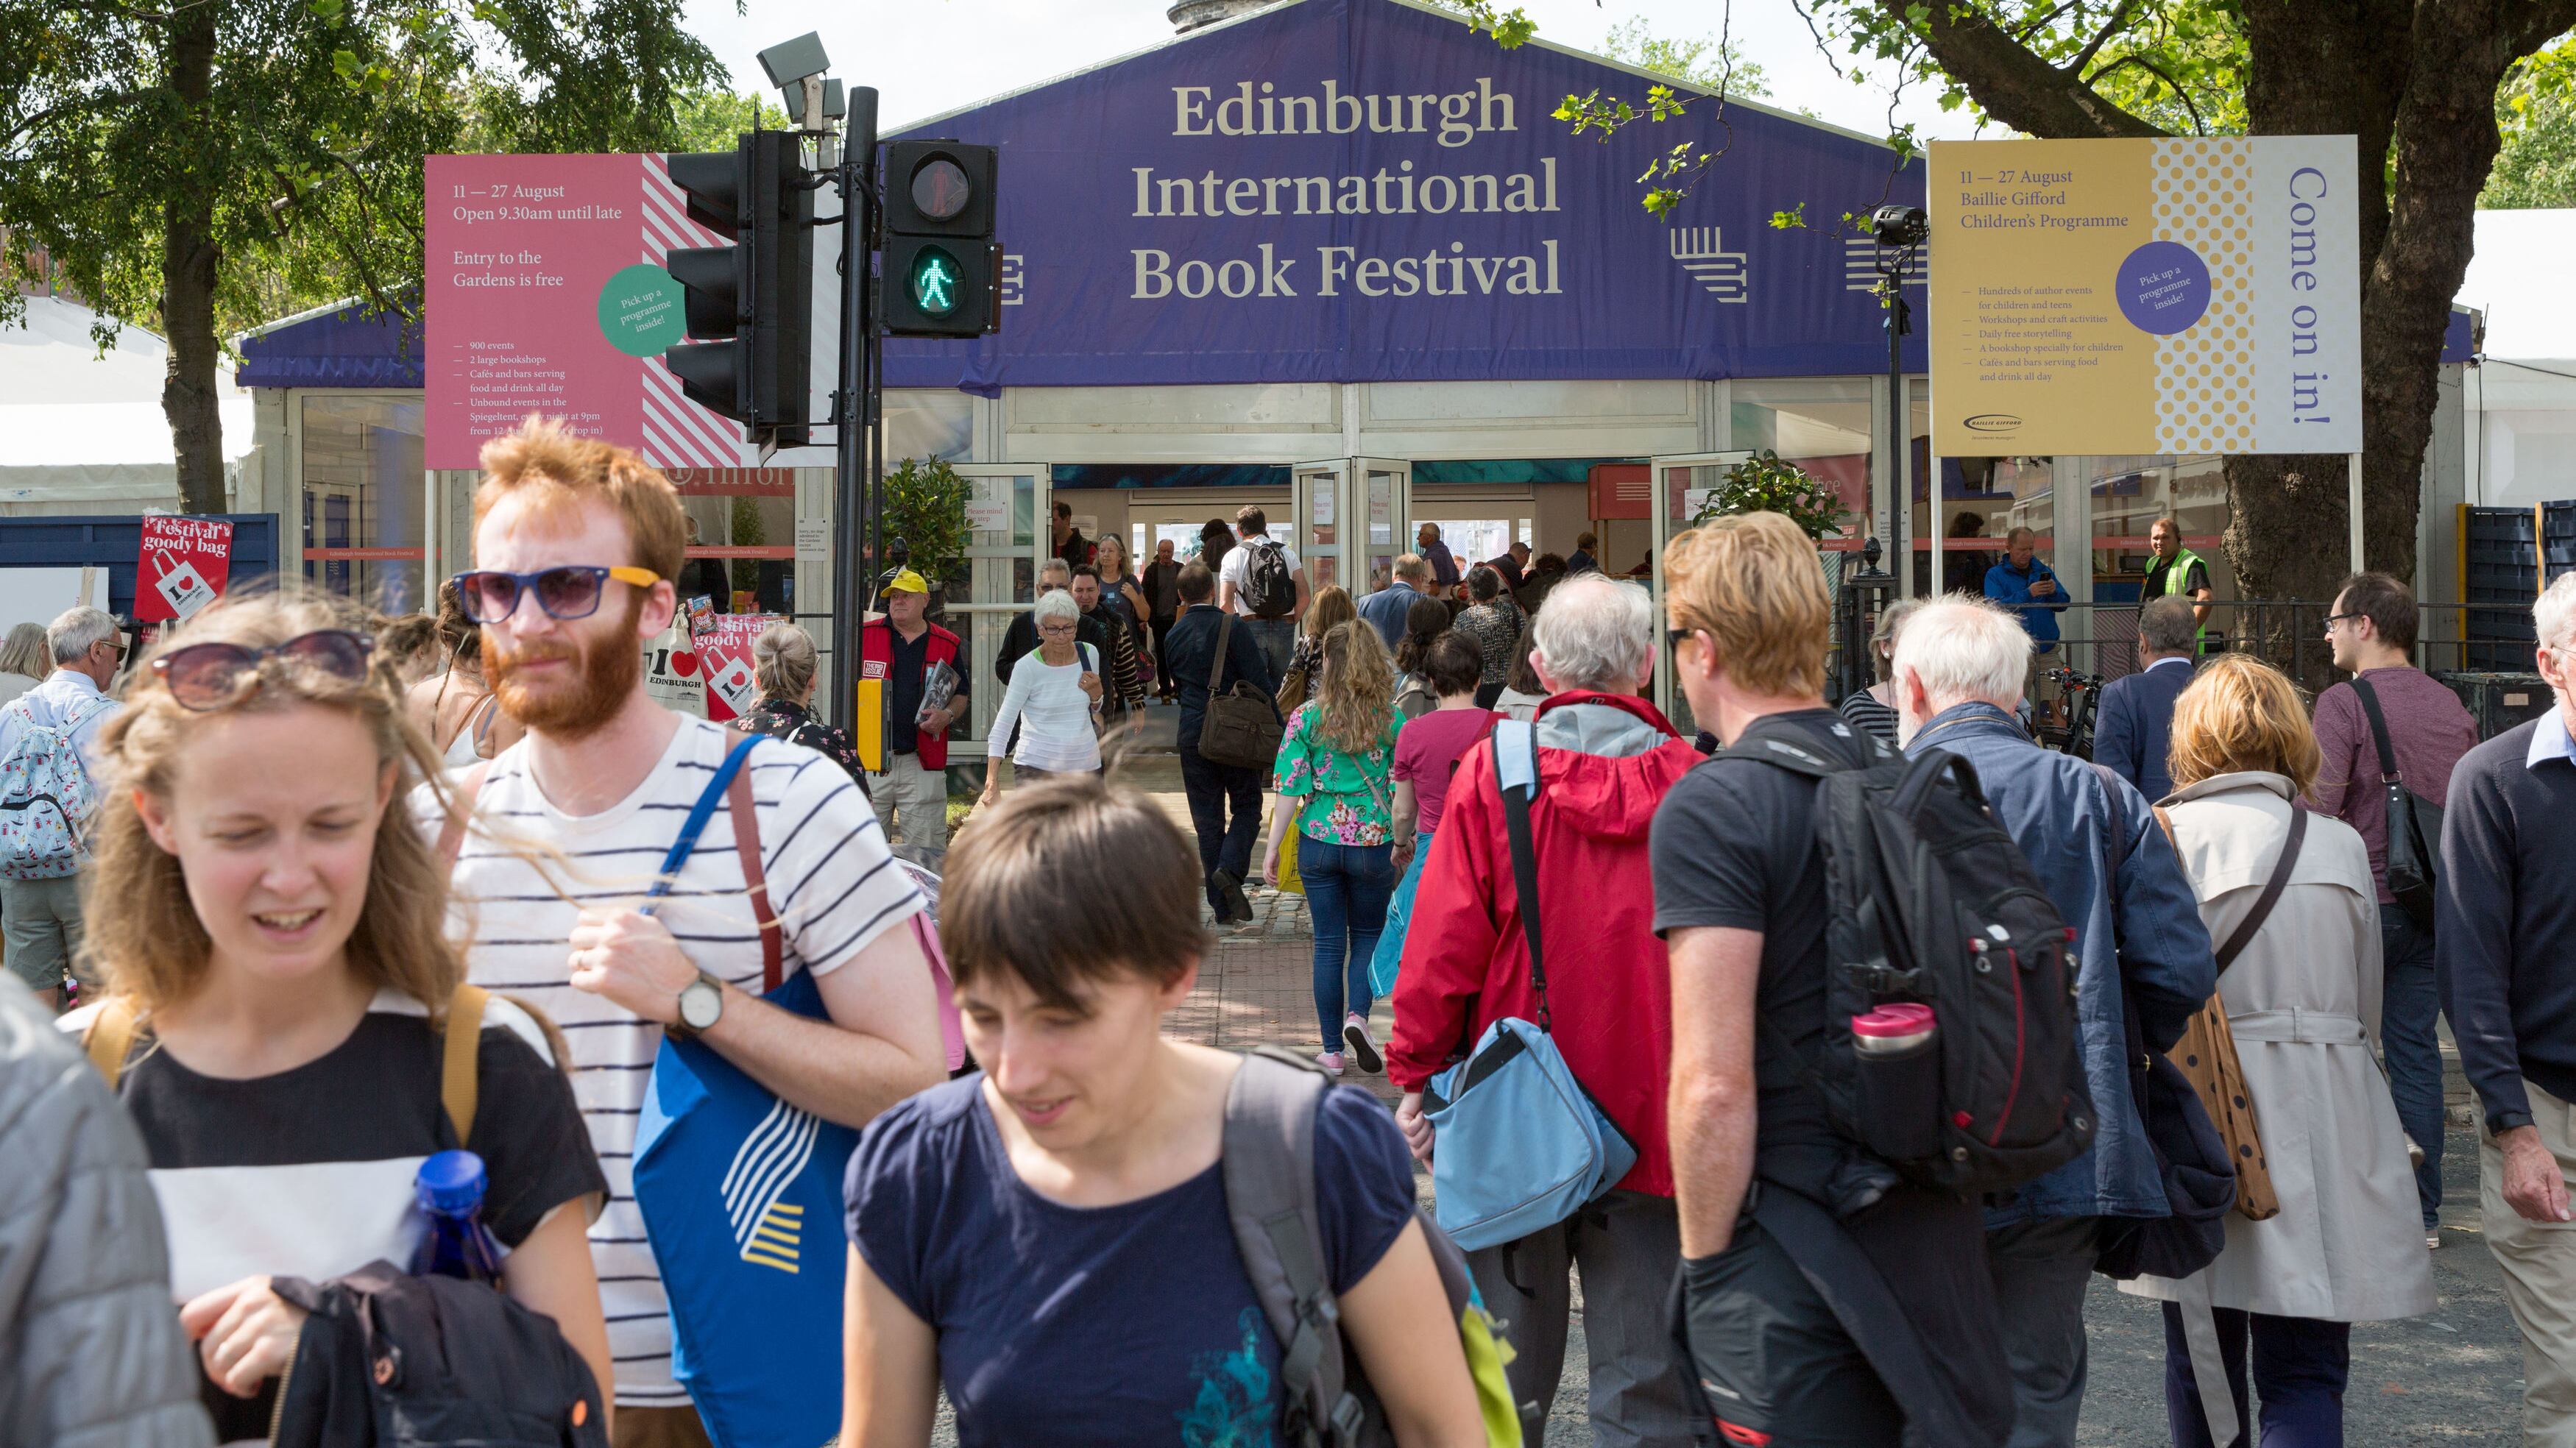 The Edinburgh International Book Festival has ended the relationship with its sponsor